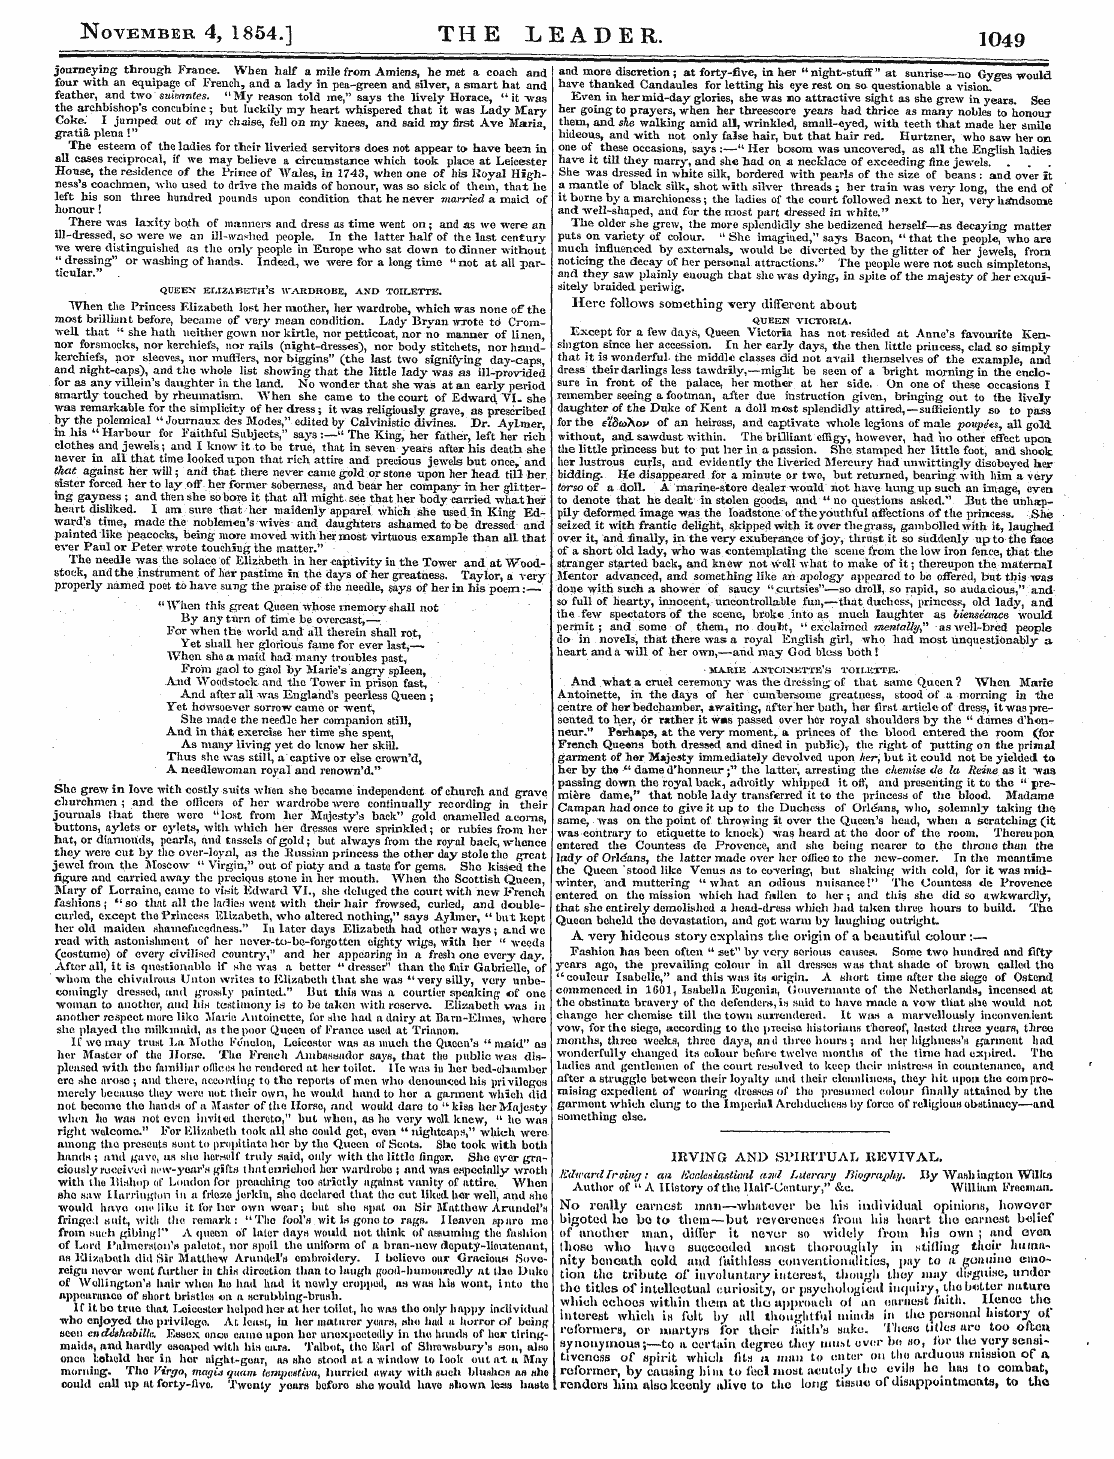 Leader (1850-1860): jS F Y, Country edition - November 4, 1854.] The Leader. 1049